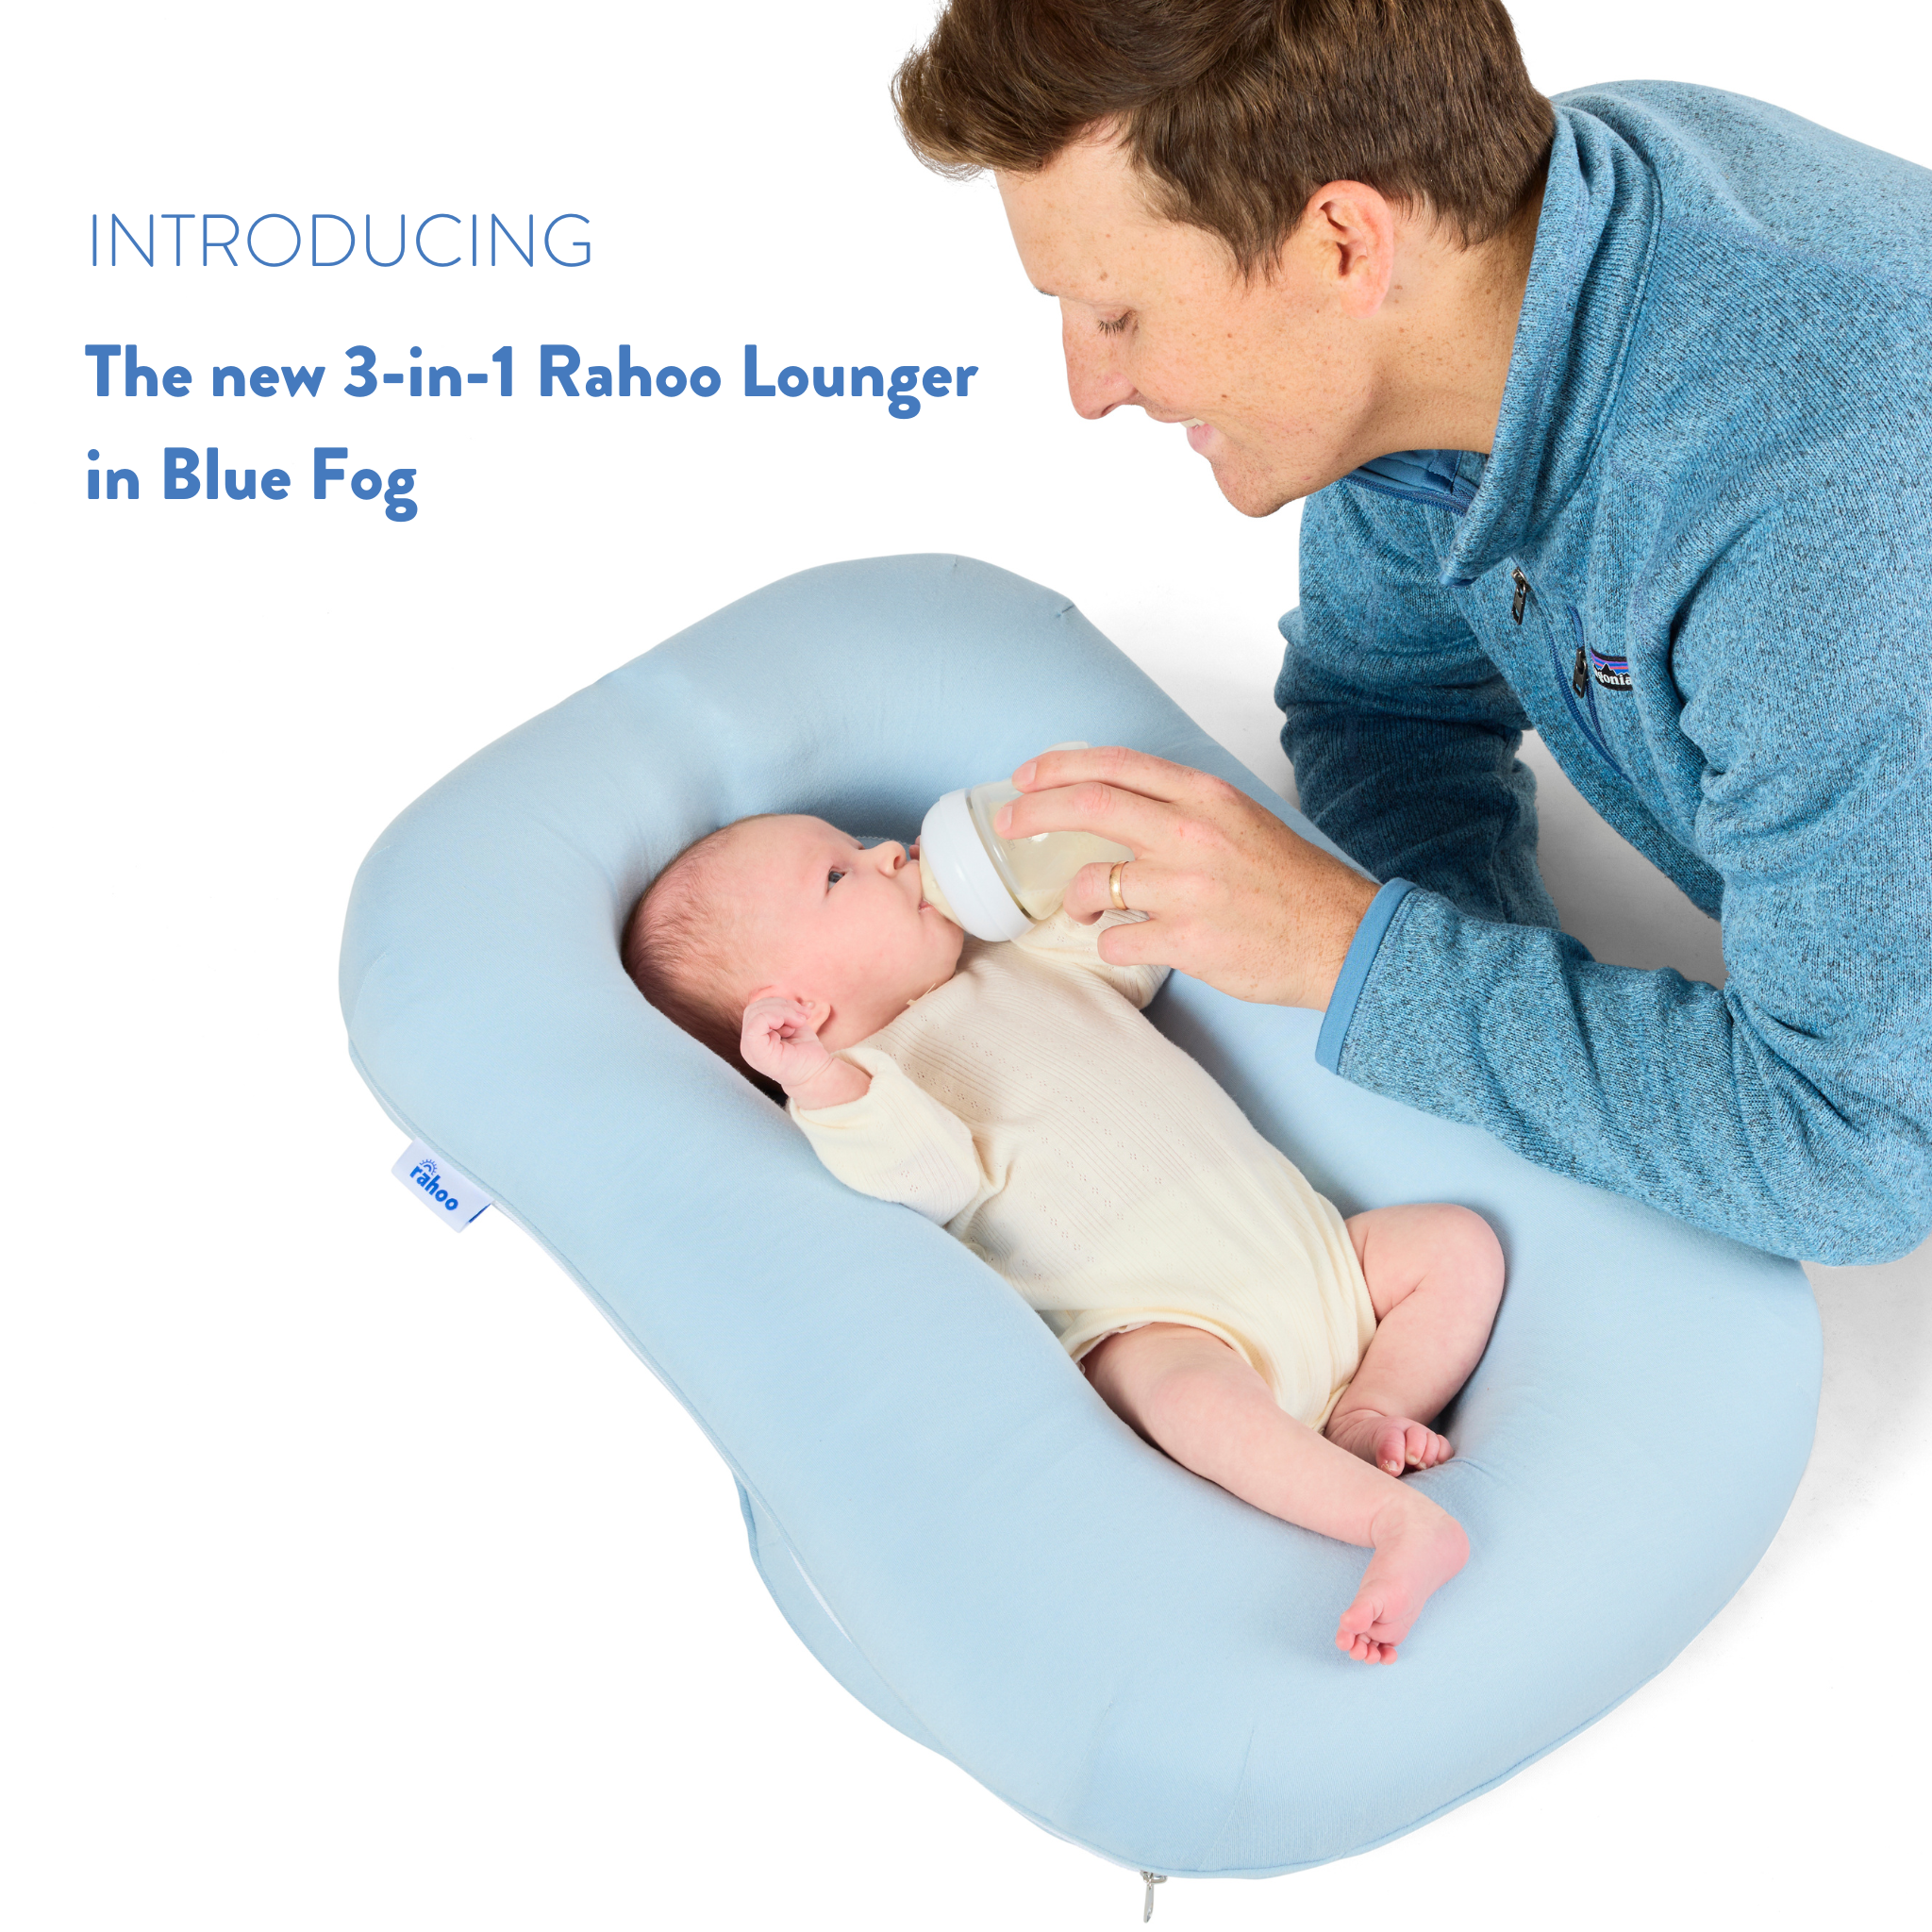 When should parents introduce pillows to their babies?